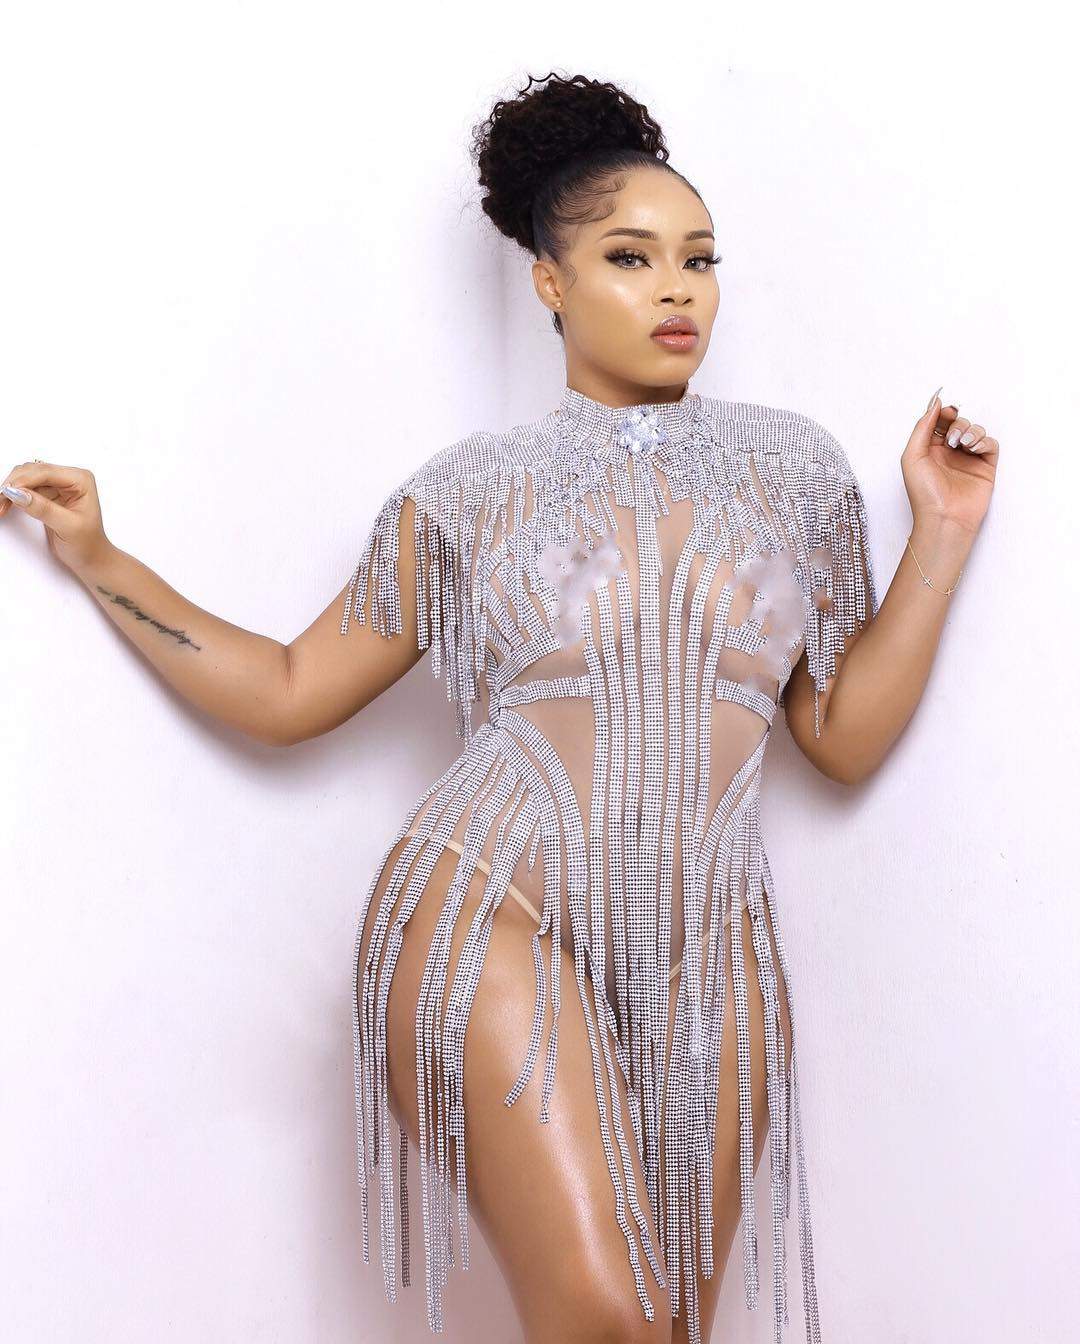 Nollywood Actress Onyi Alex flaunts Her Body In A New Birthday Photo